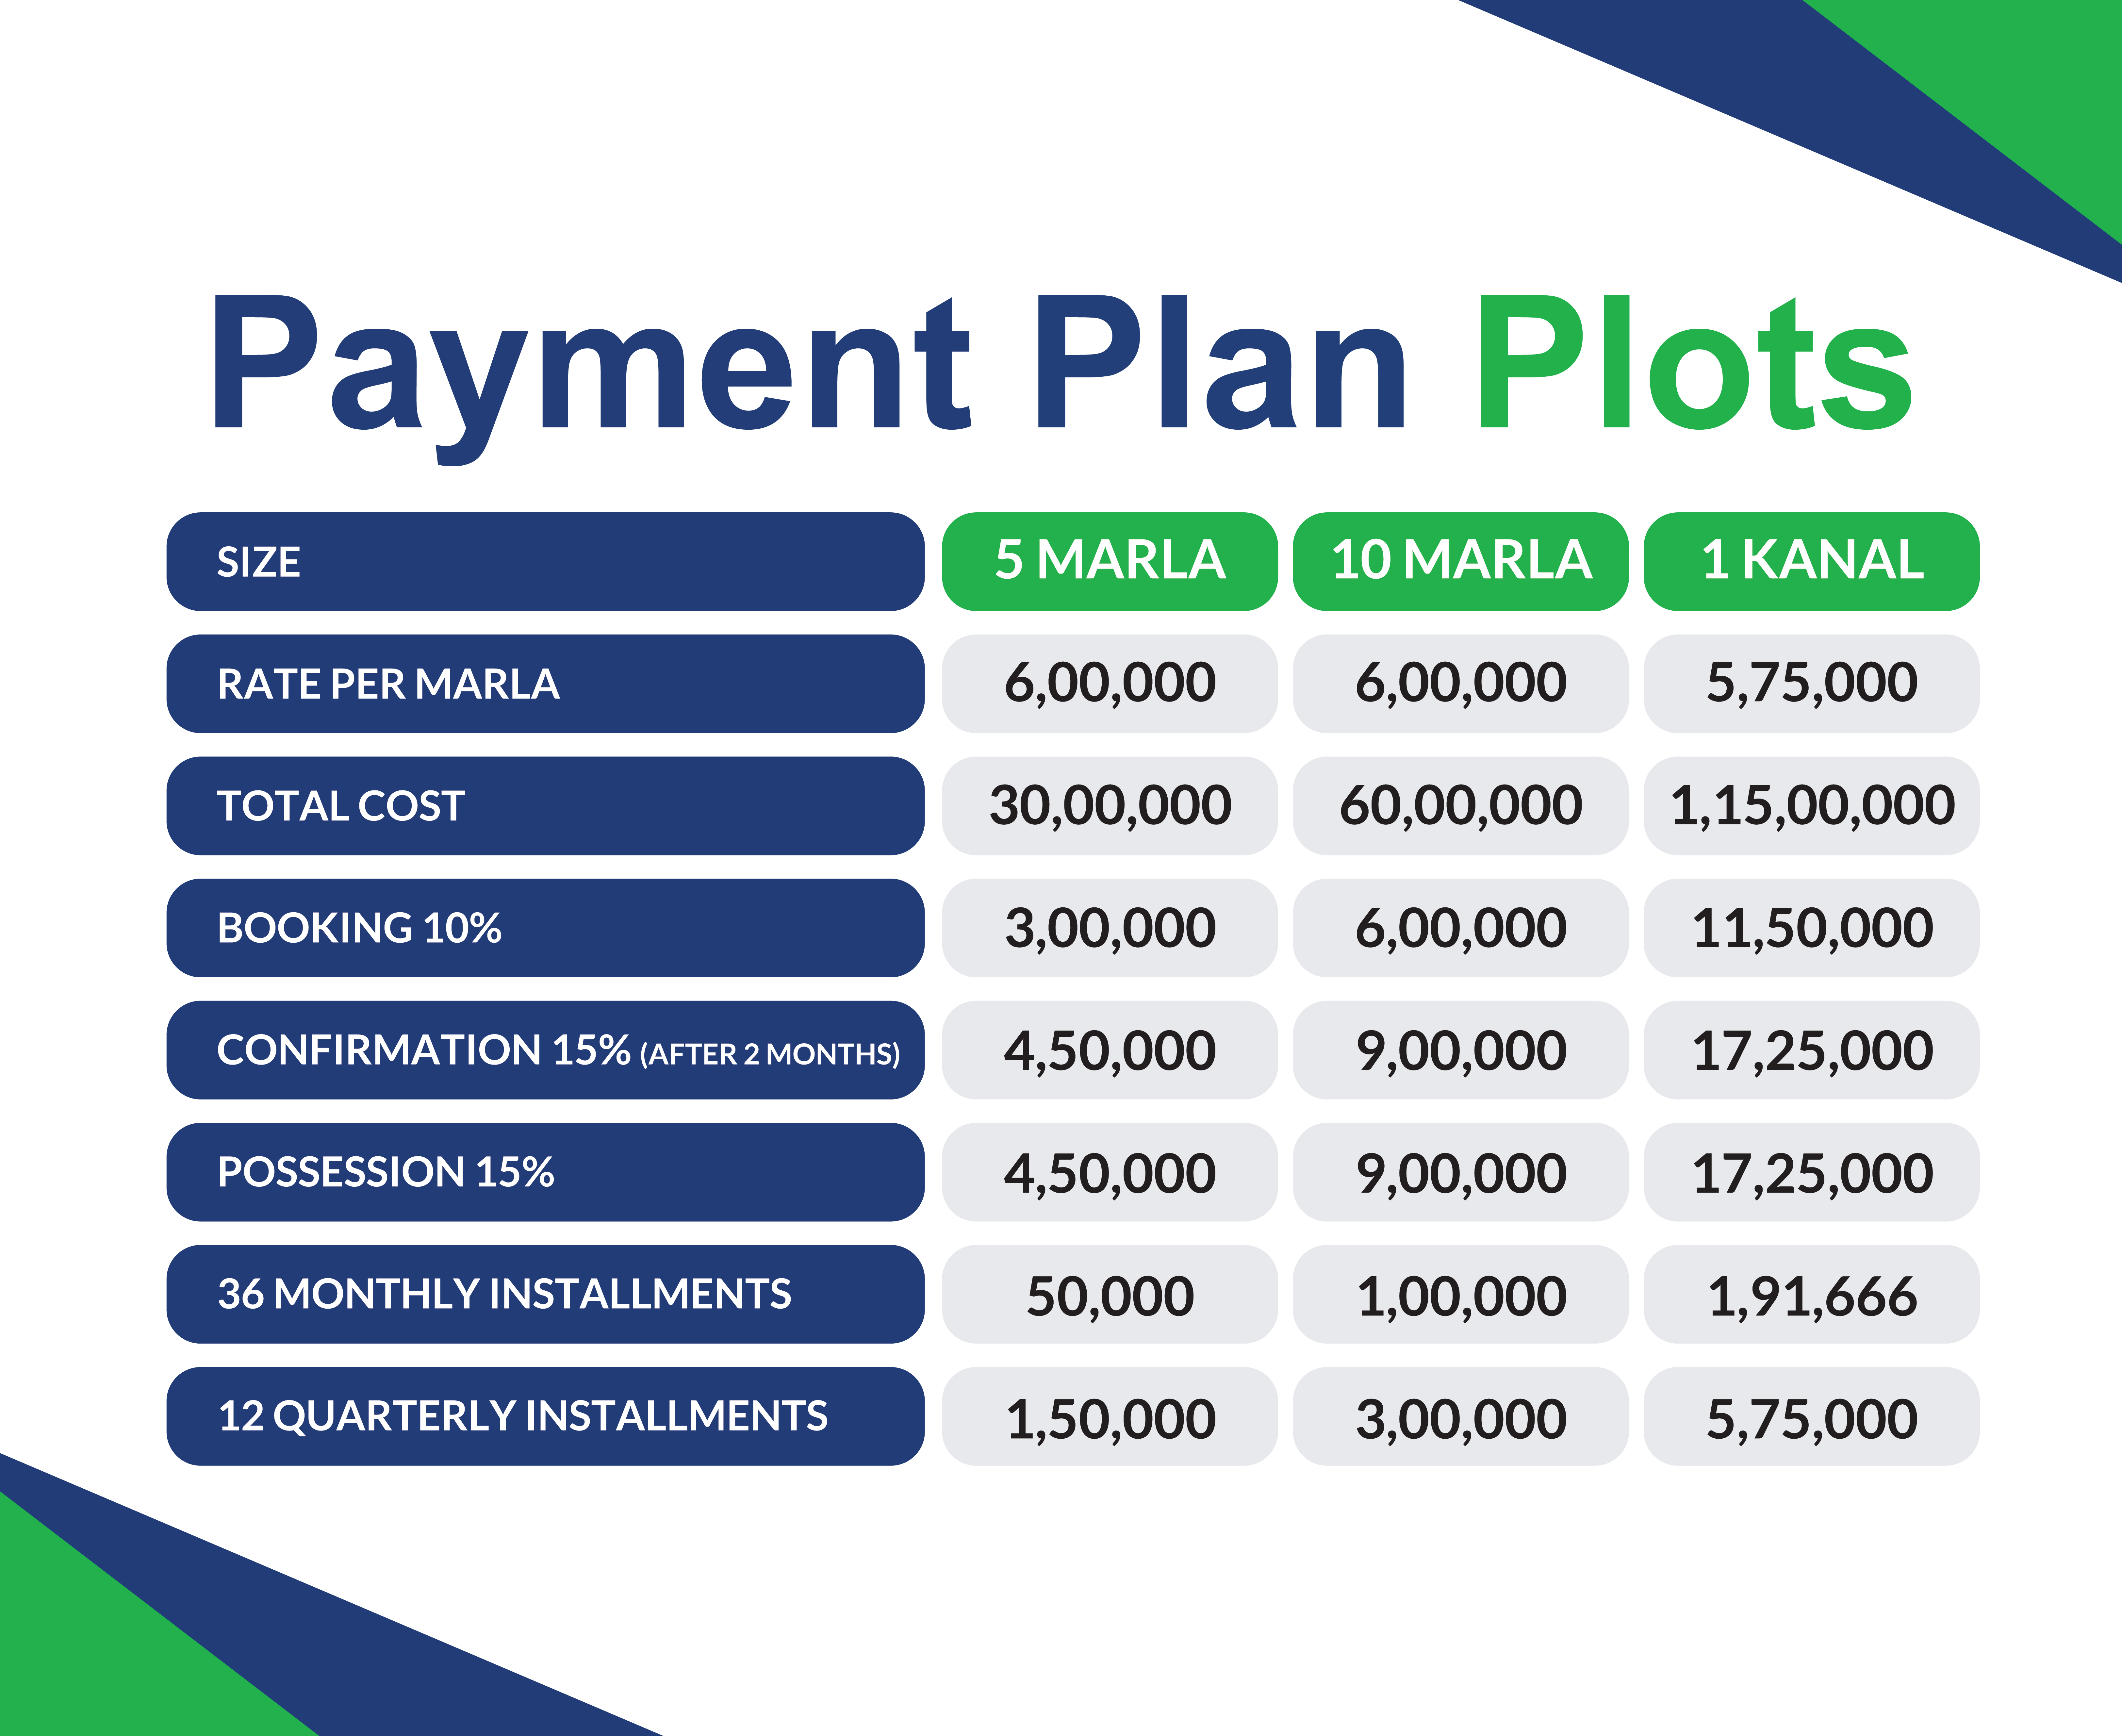 Hospitality Park payments plans, Hospitality Park new murree, fast marketing consultants,